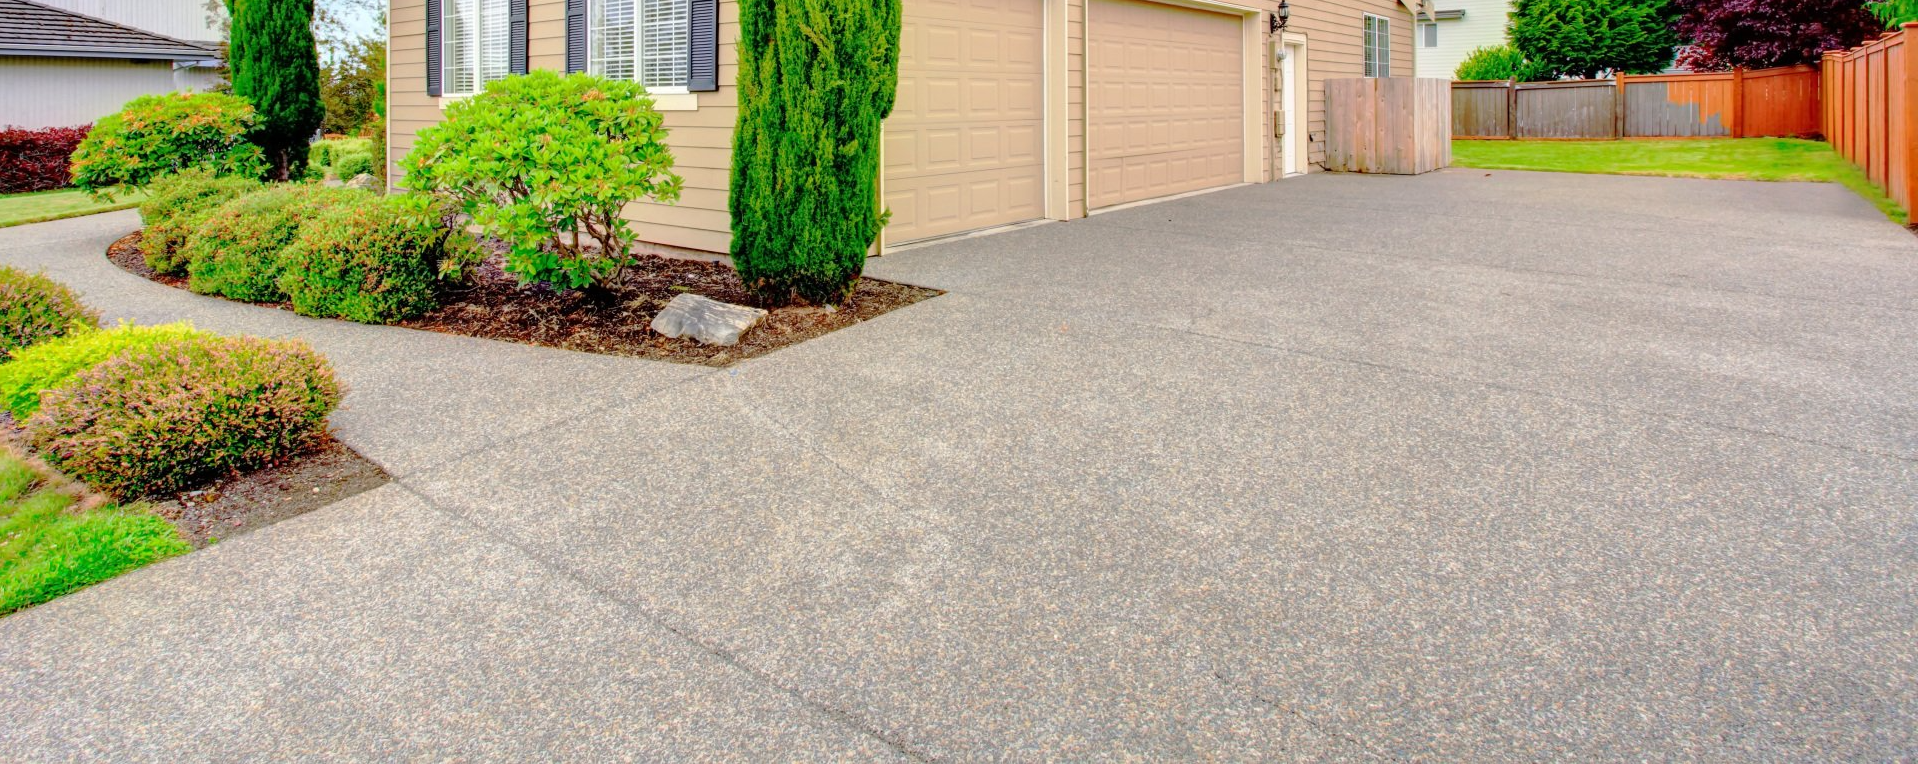 beautiful new aggregate concrete driveway at residential Michigan home